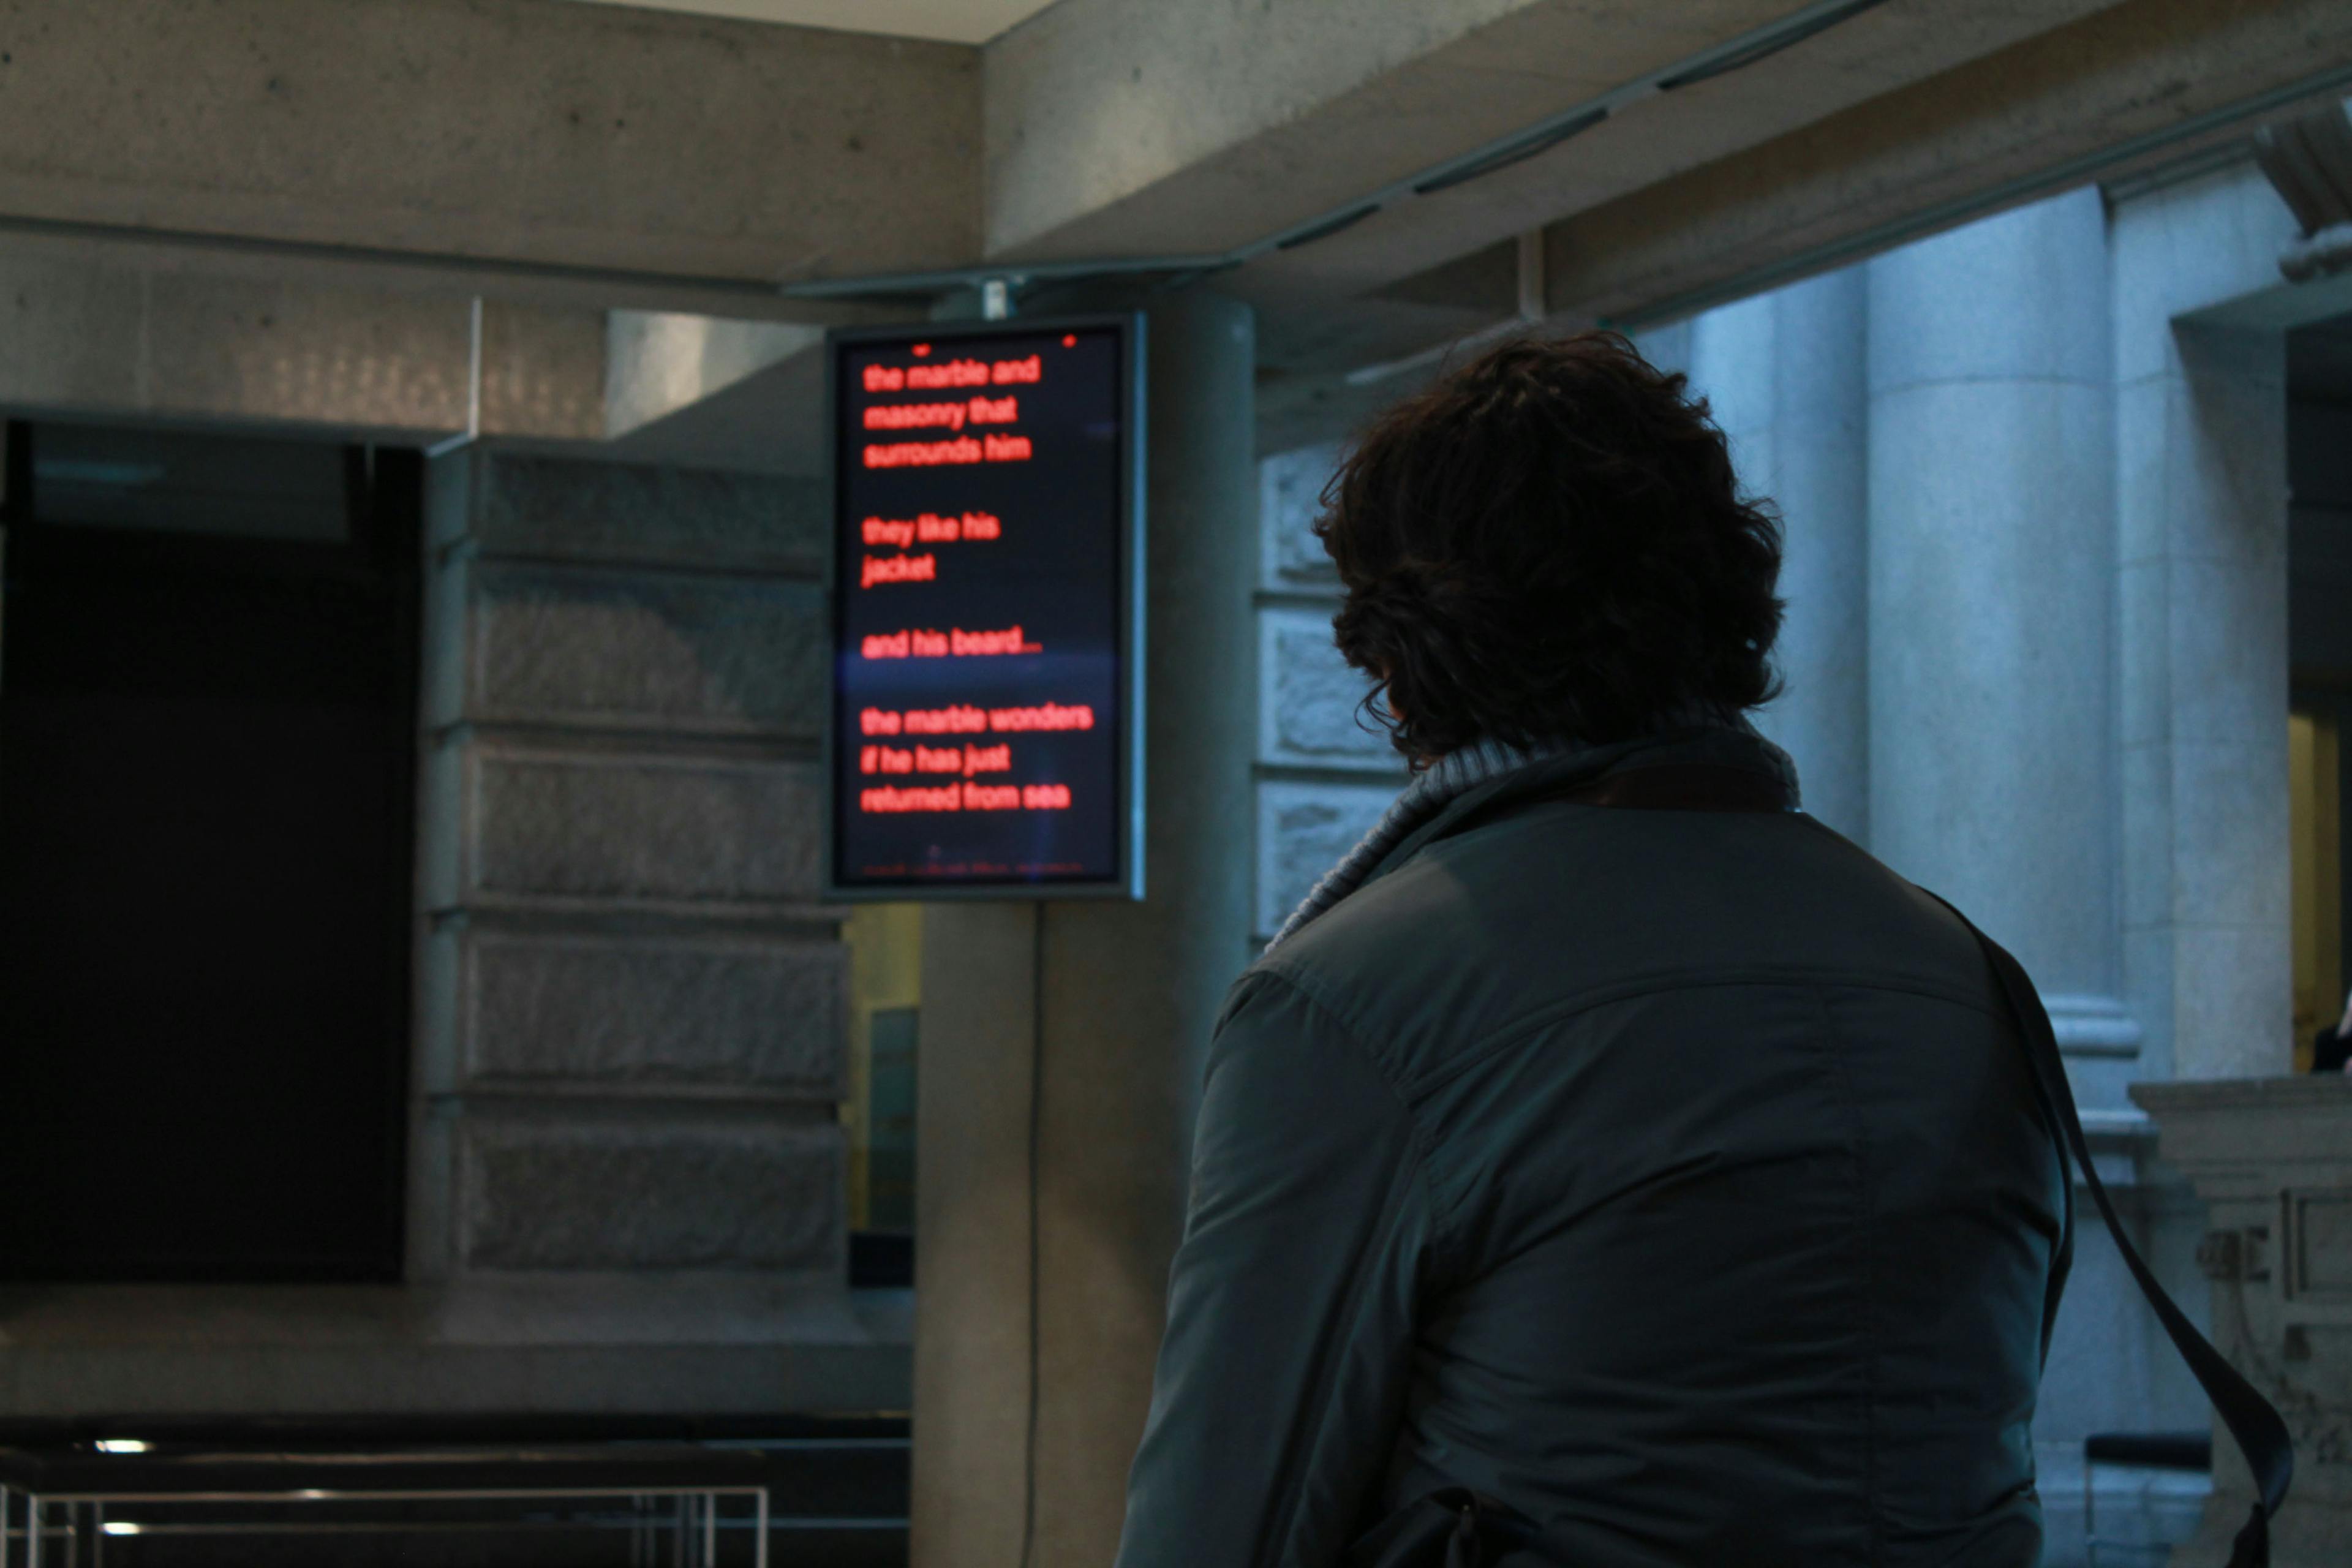 A person in a grey jacket looks at a monitor installed in an upper corner of an indoor space. The screen is black with illuminated text in red.